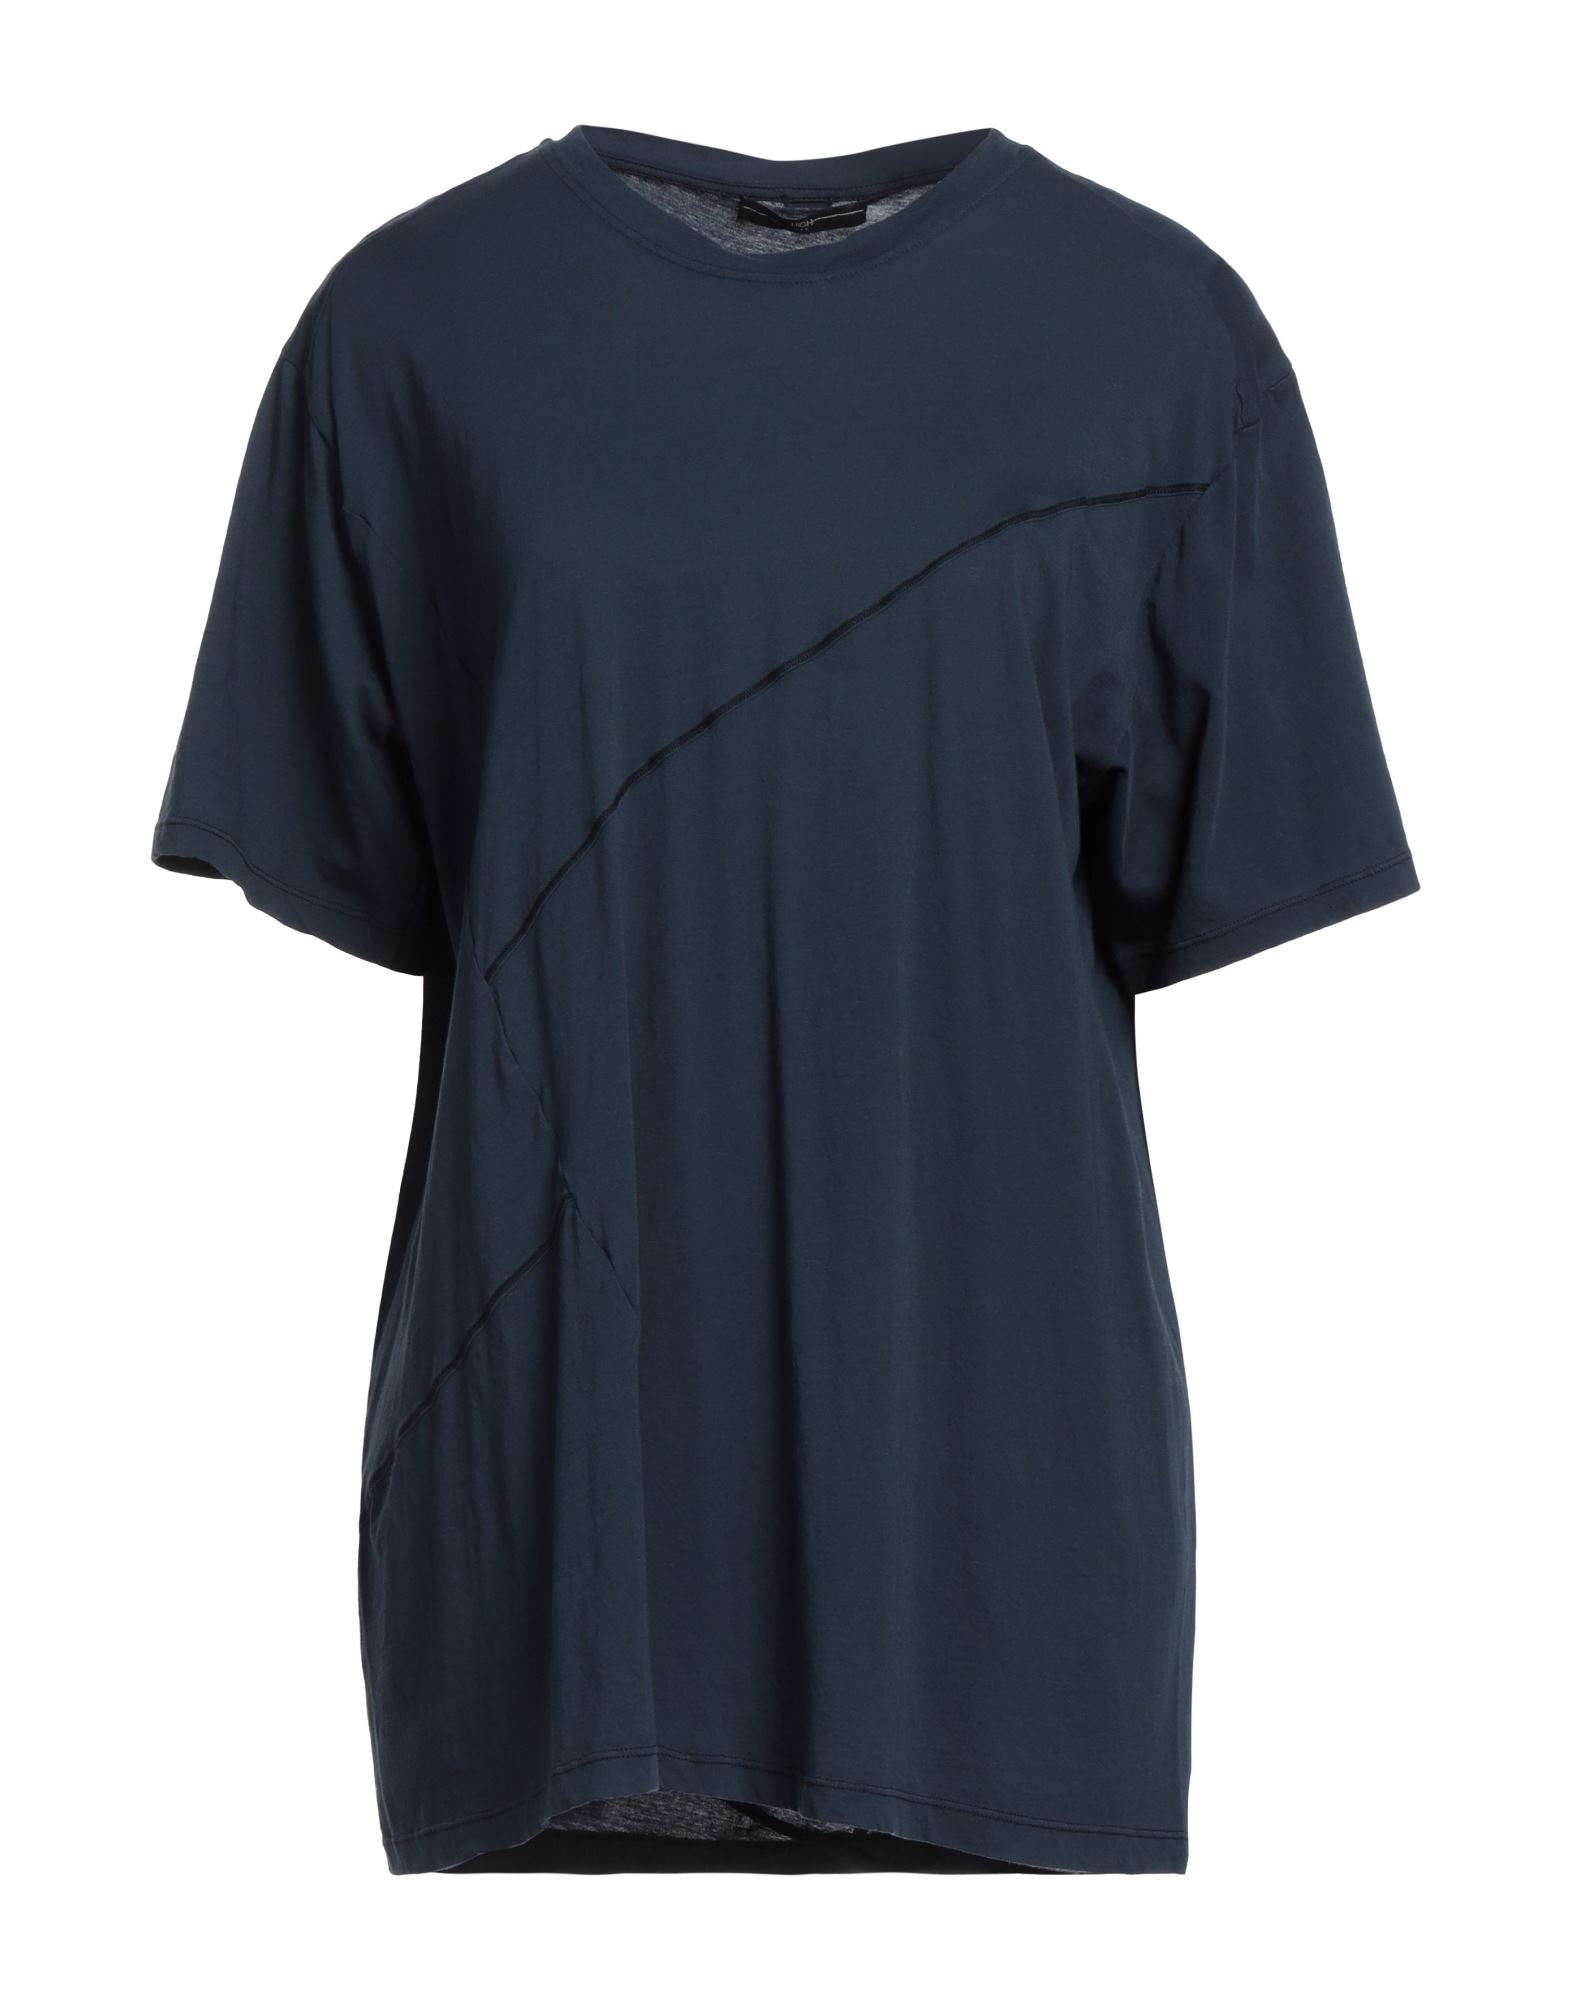 High T-shirts In Navy Blue